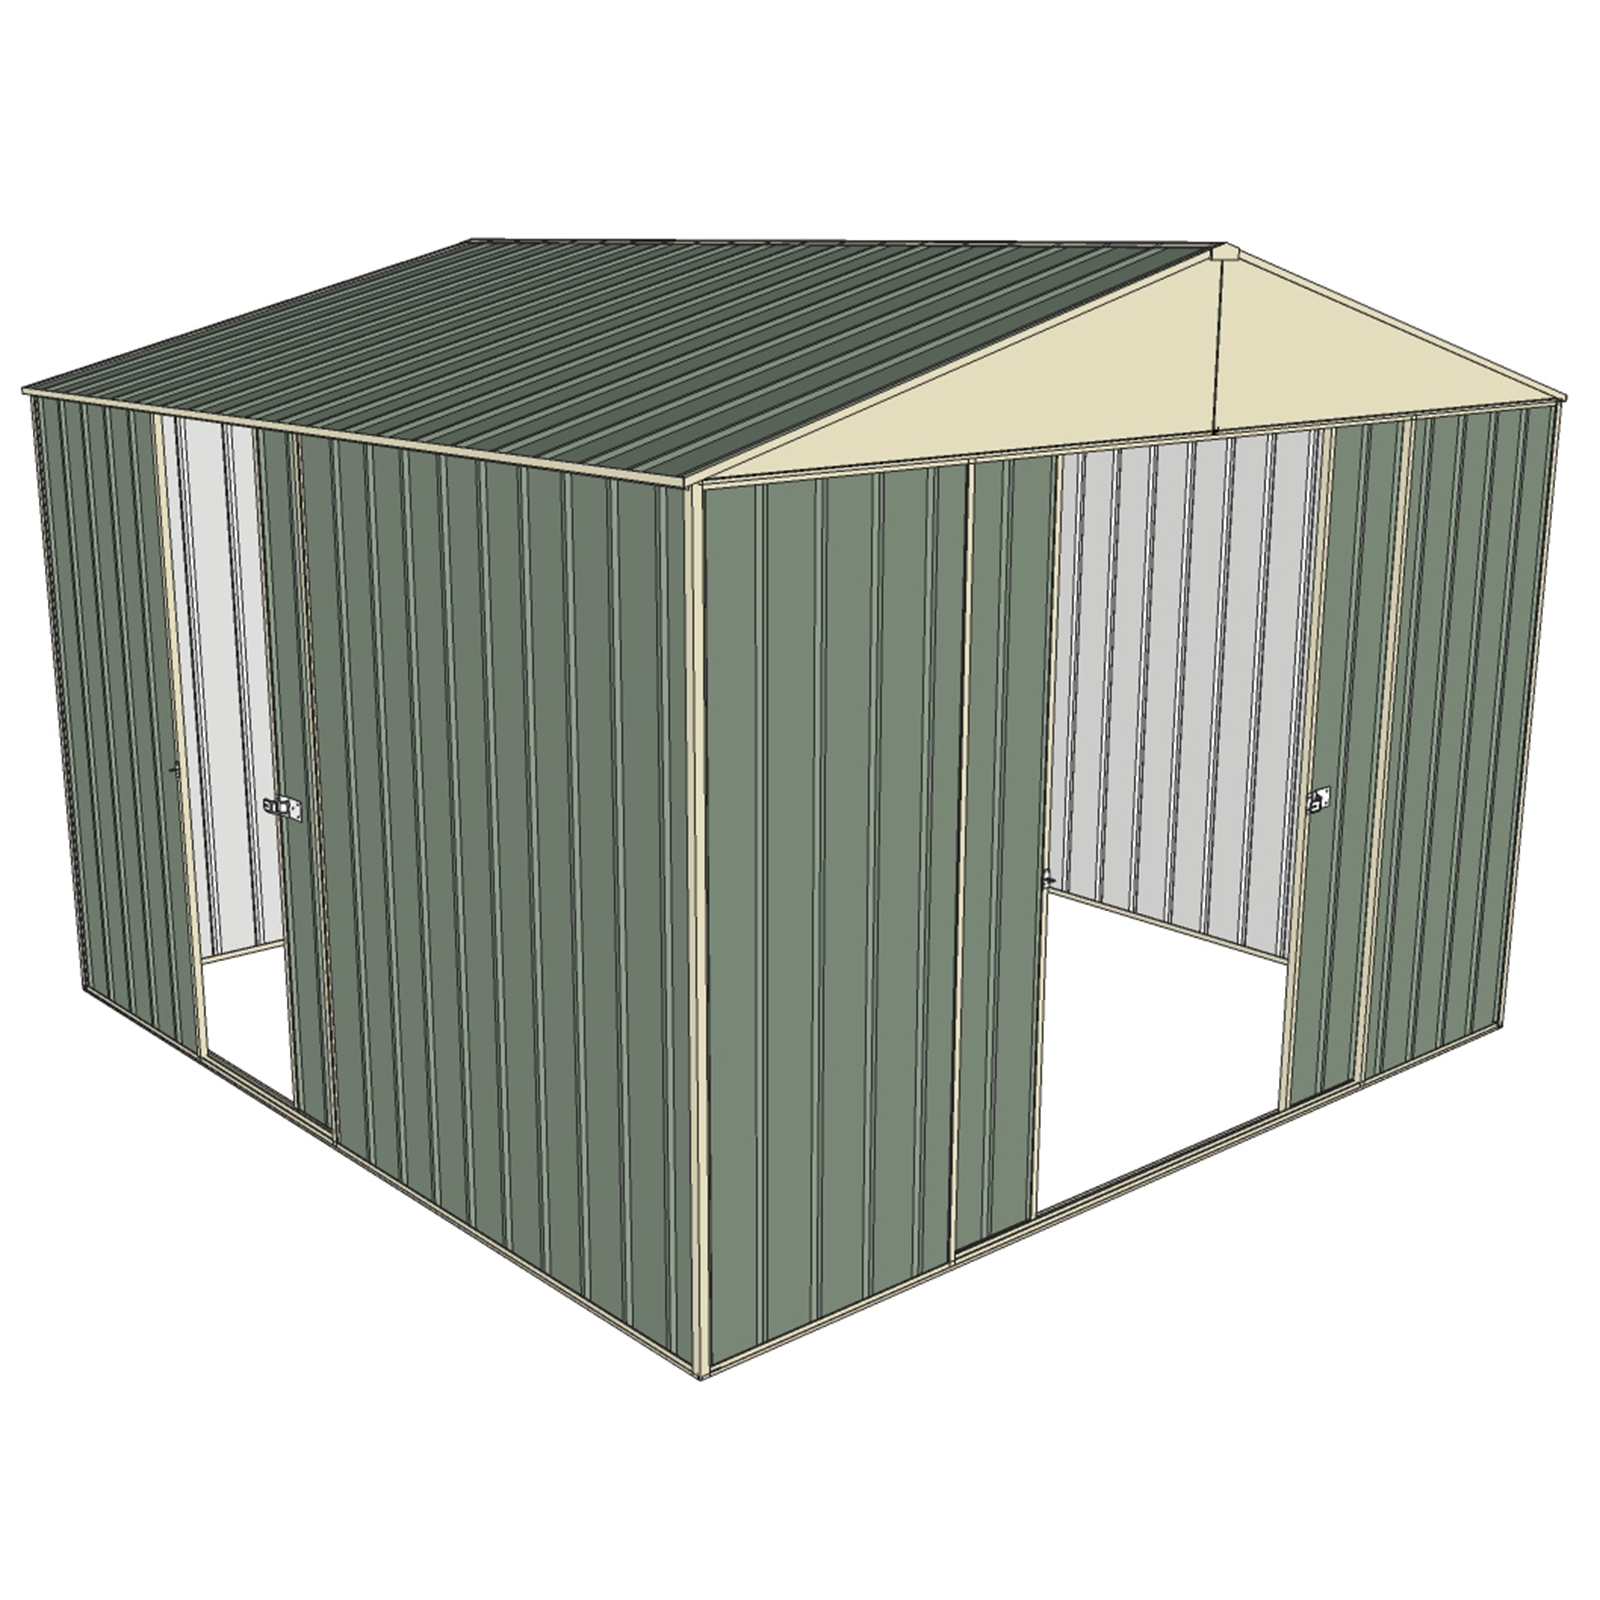 Build-a-Shed 3.0 x 2.3 x 3.0m Green Triple Sliding Door Shed